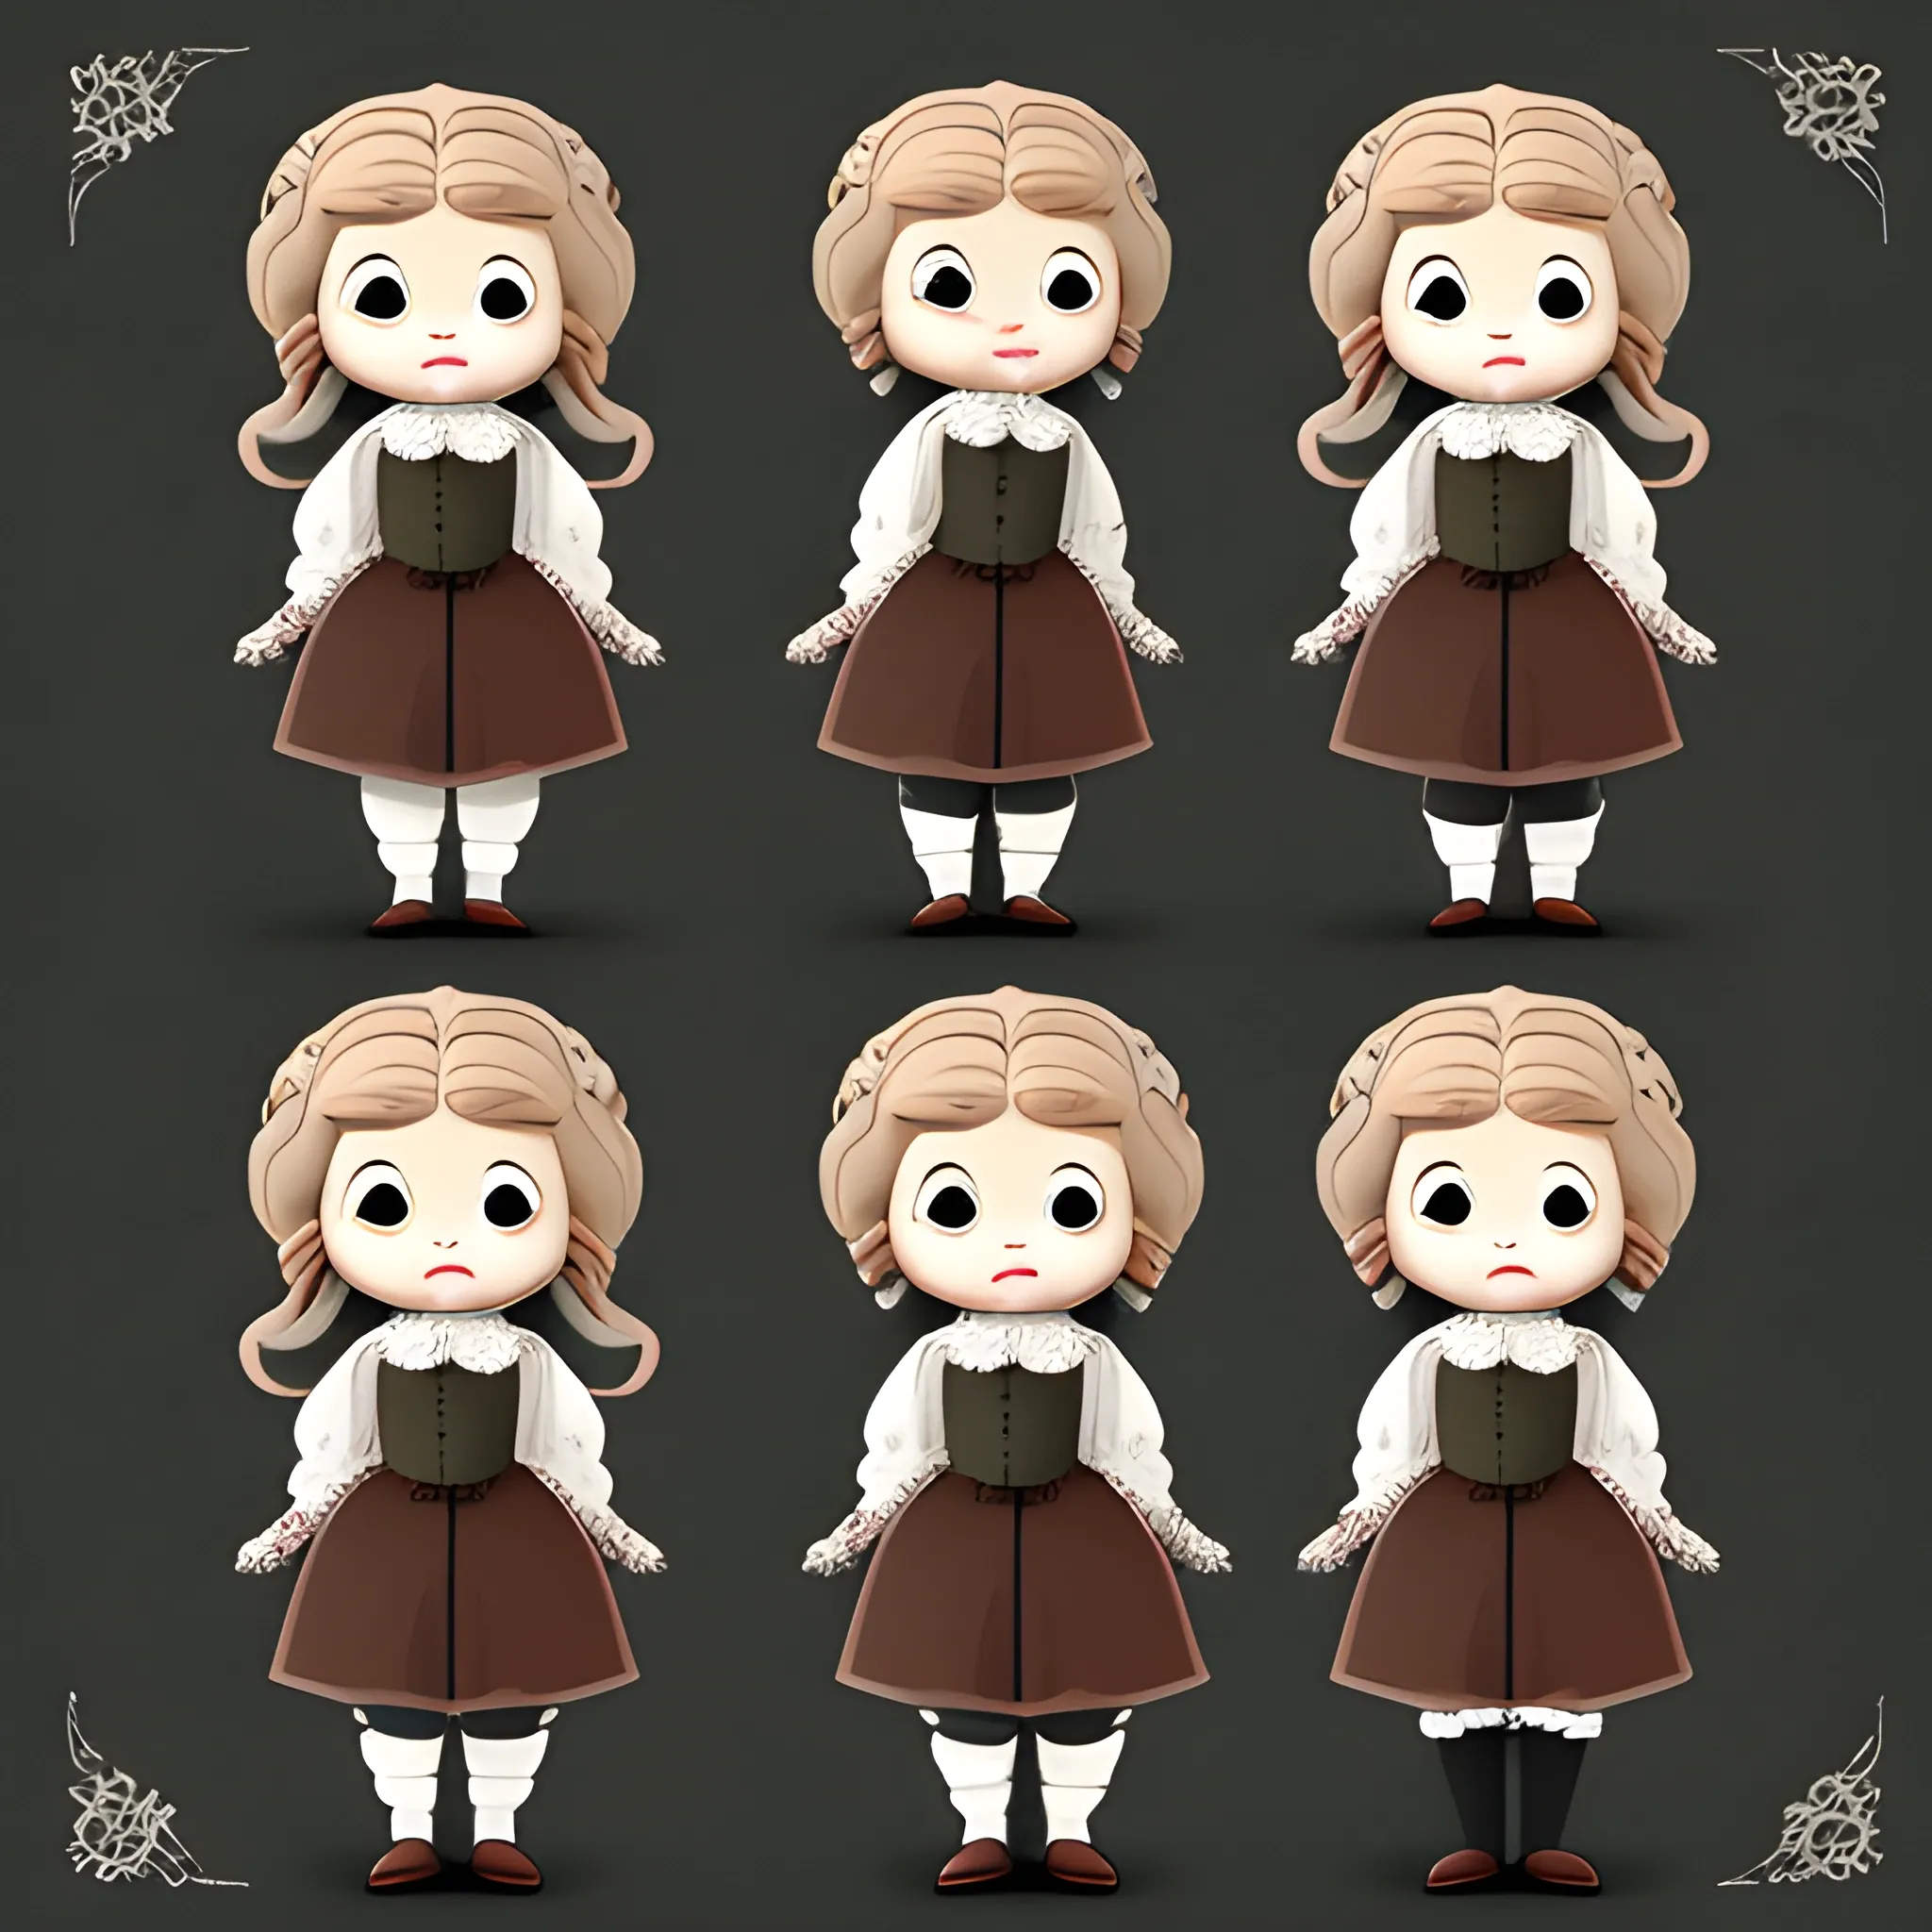 character sheet, cute cartoon victorian doll in different poses and angles
